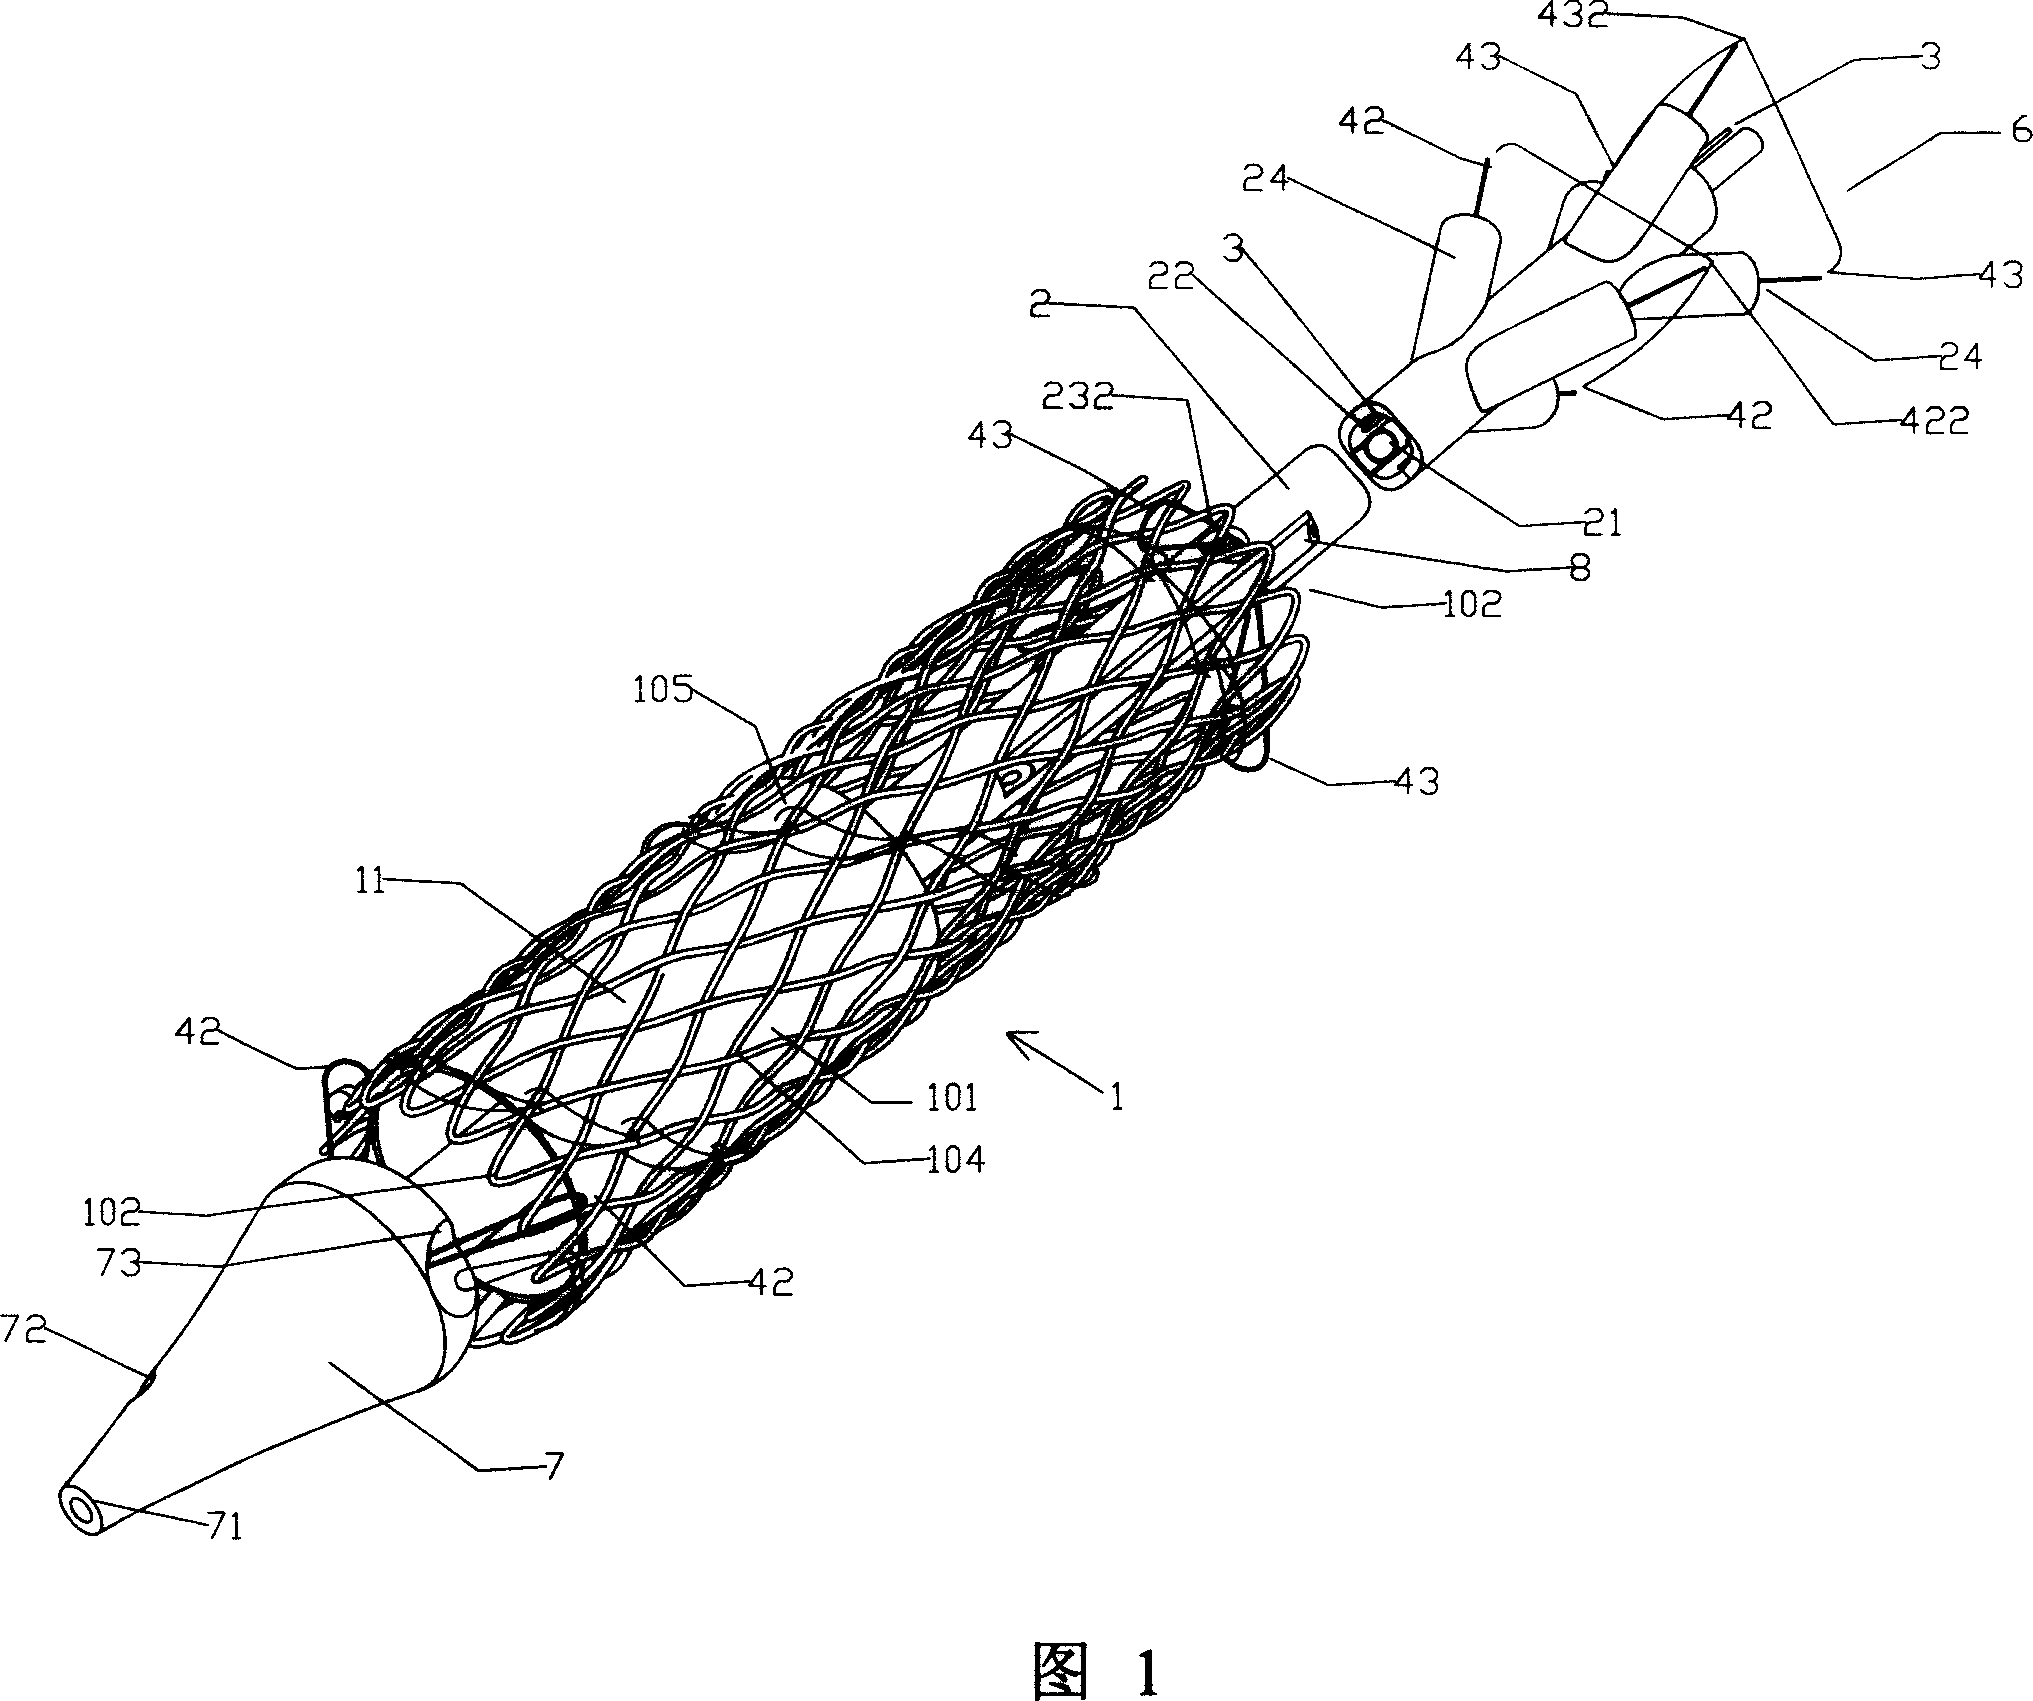 Self-expanding stent axial wire-drawing tensioning mechanism